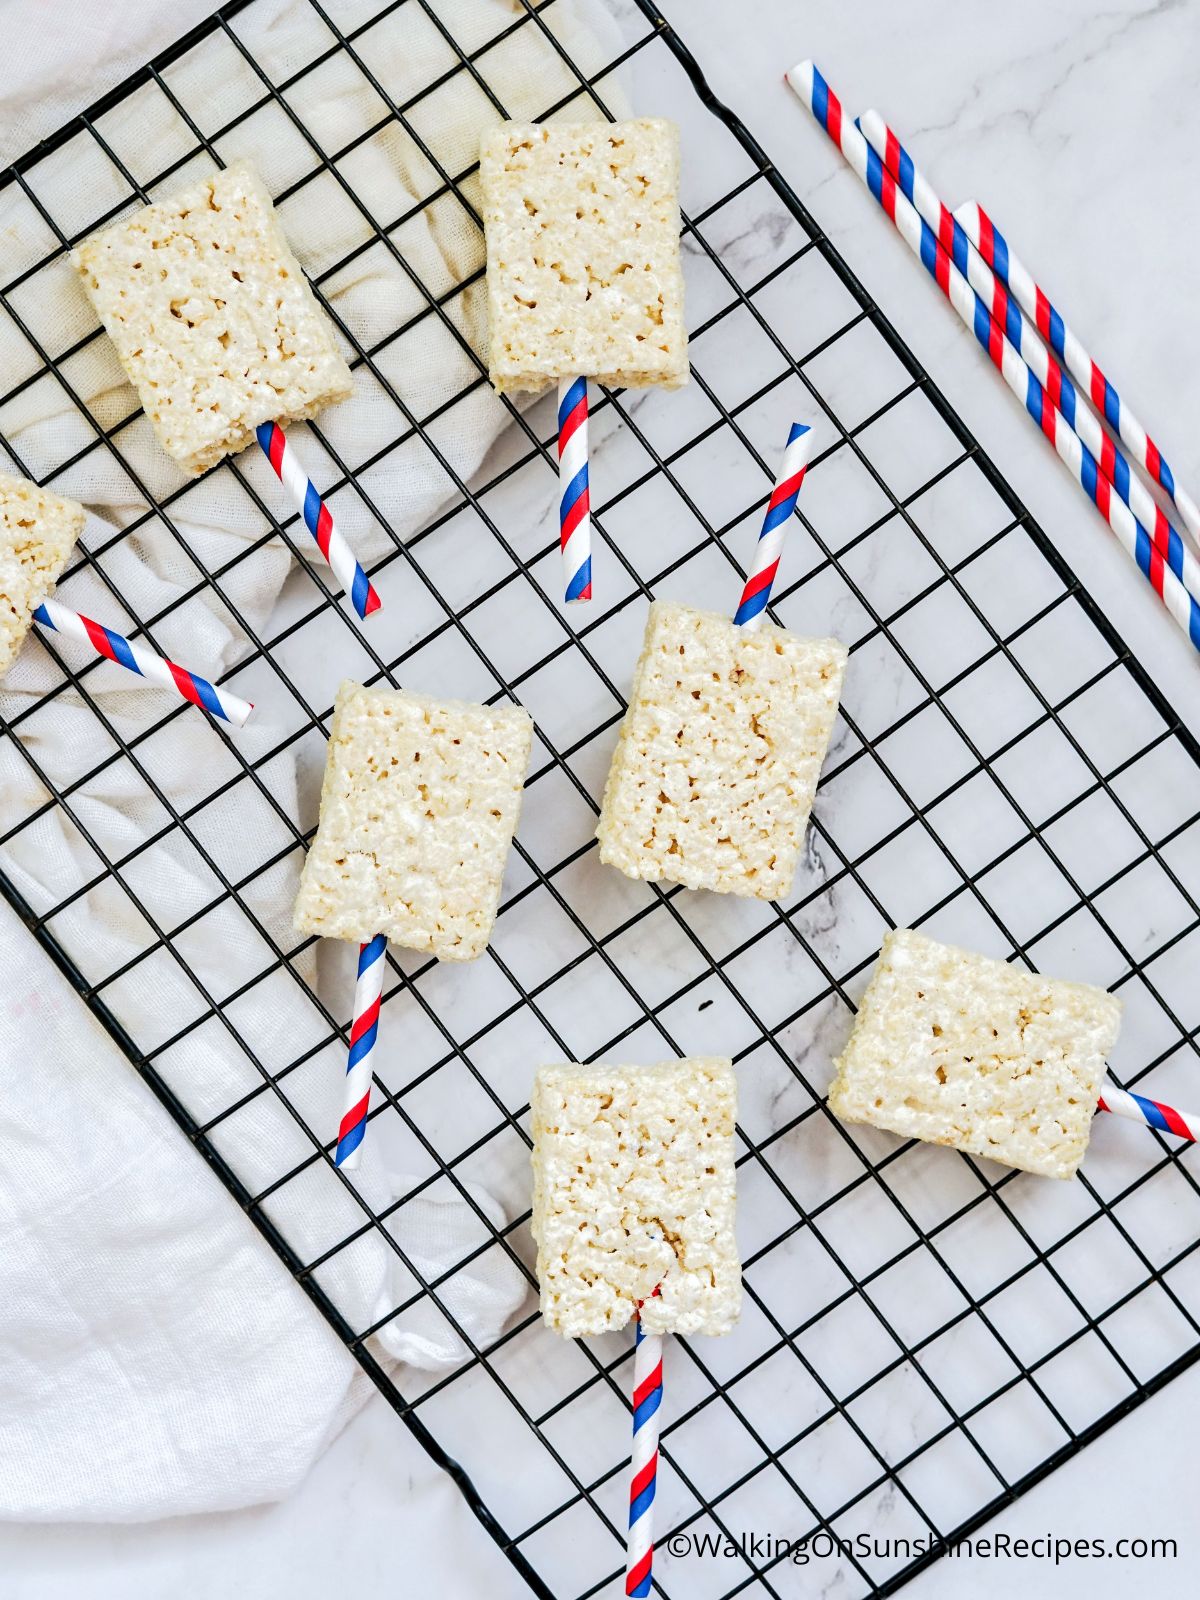 Add red, white and blue straws to treats.